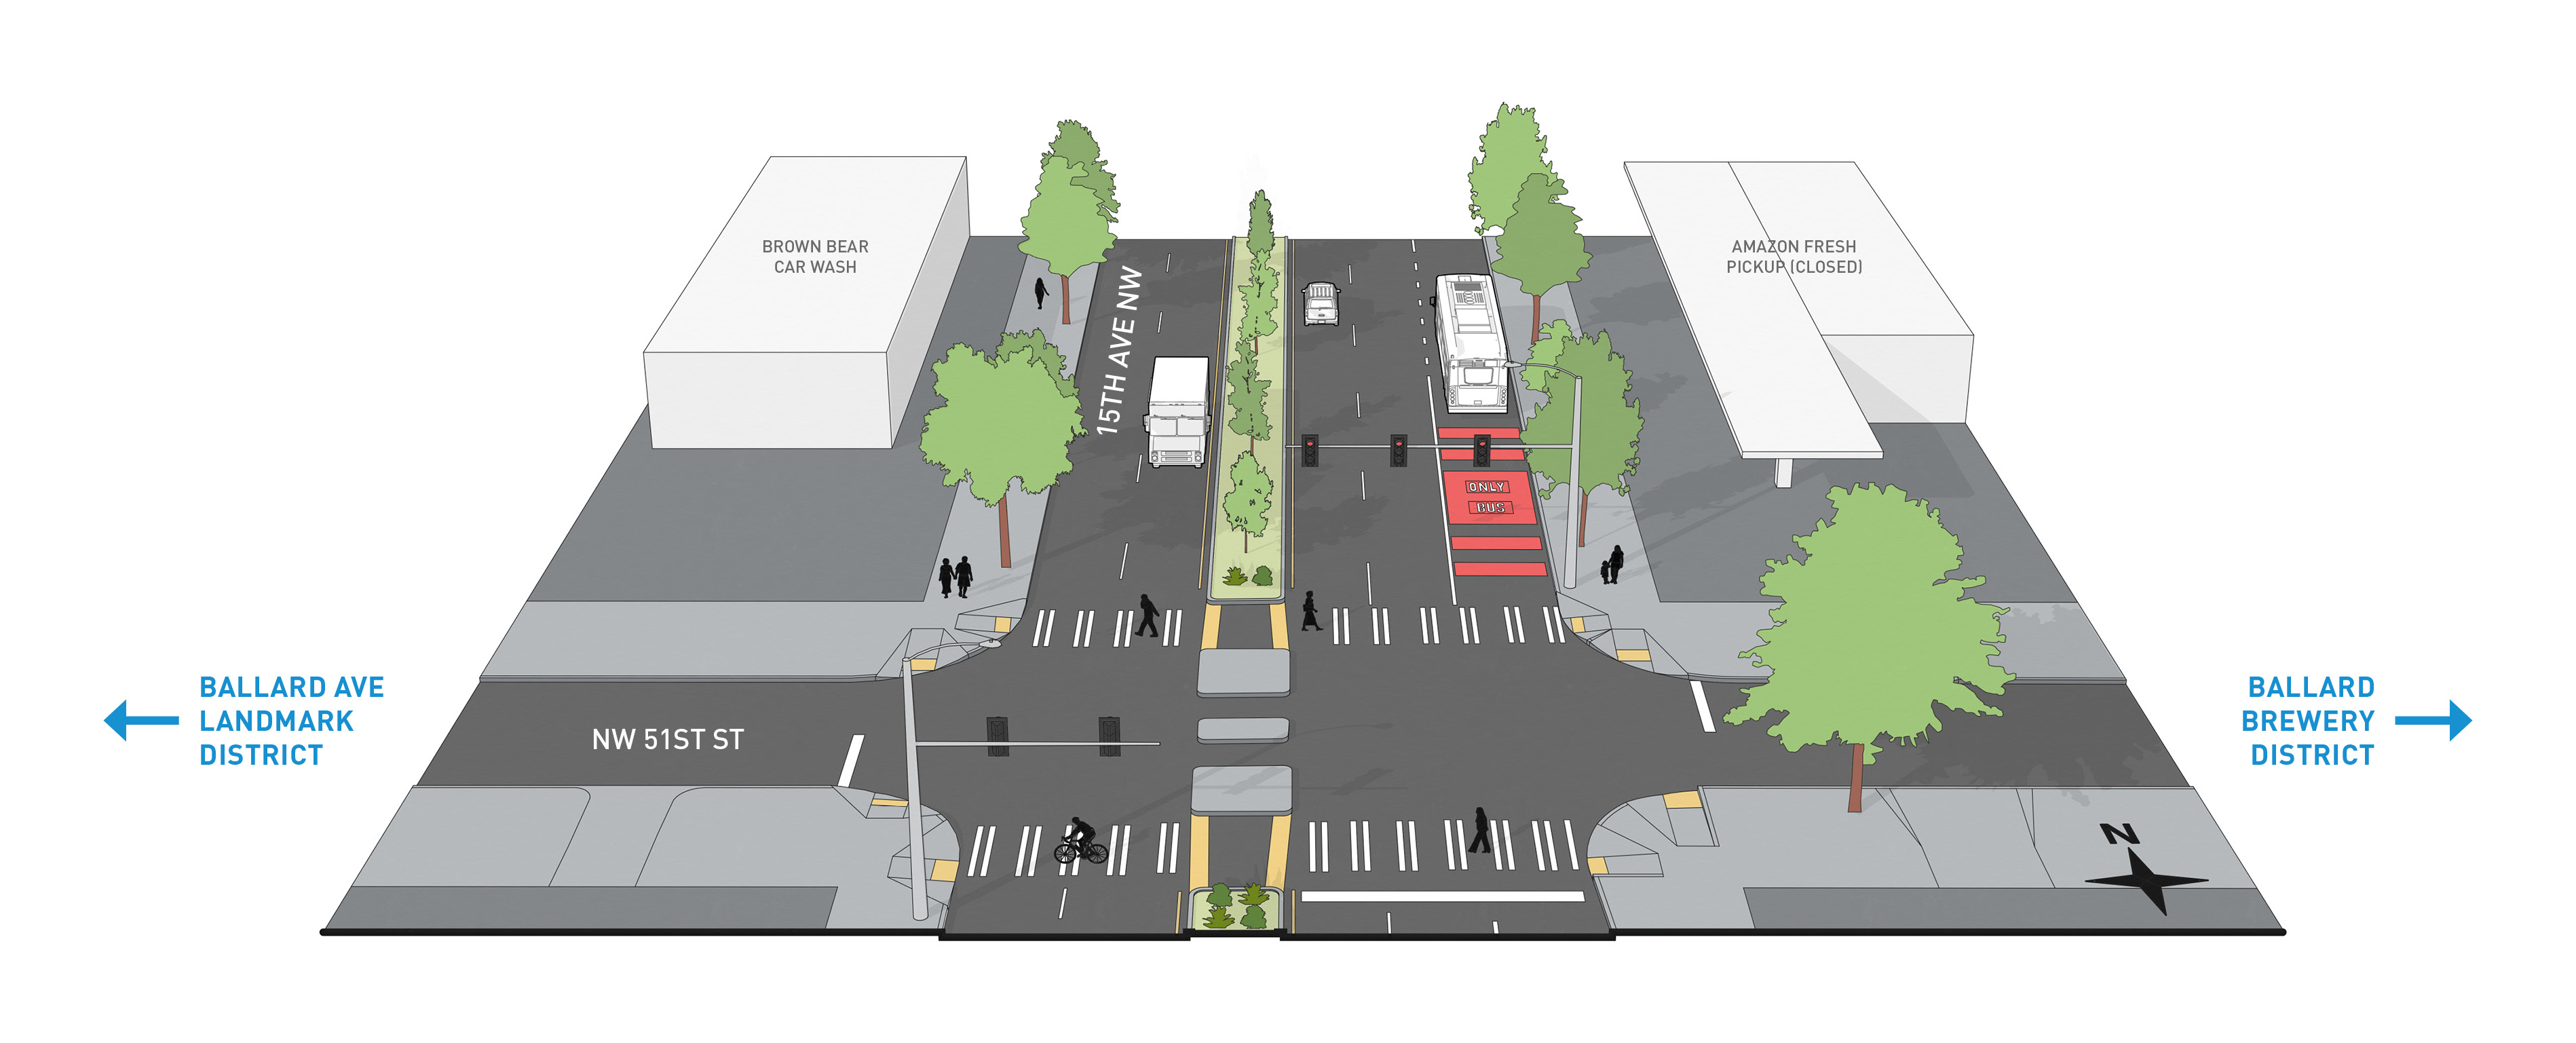 After community urging, SDOT adds last-minute safety improvements to 15th Ave NW paving project